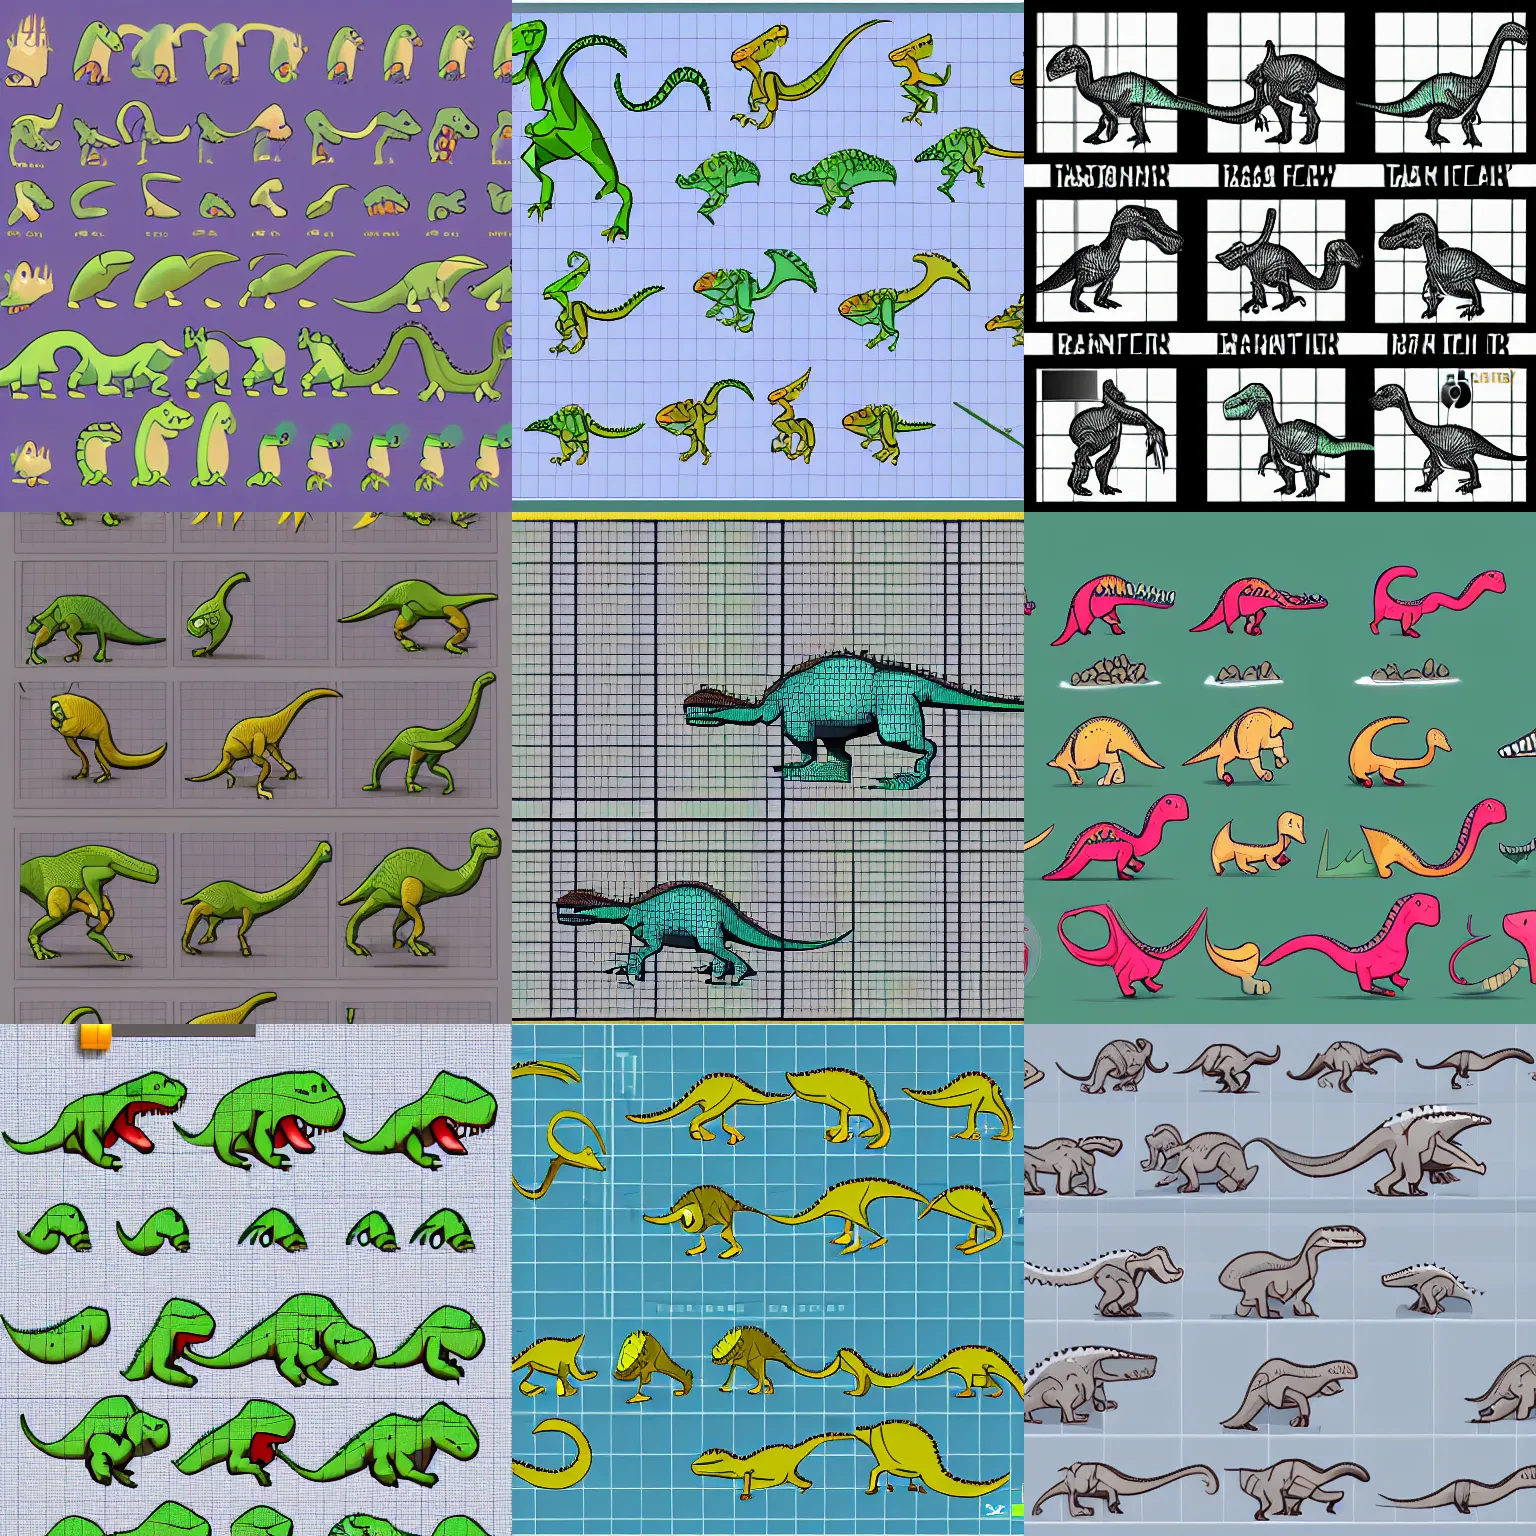 Prompt: a dinosaur running sprite sheet animation, production ready, clean lines, 3 x 3 grid